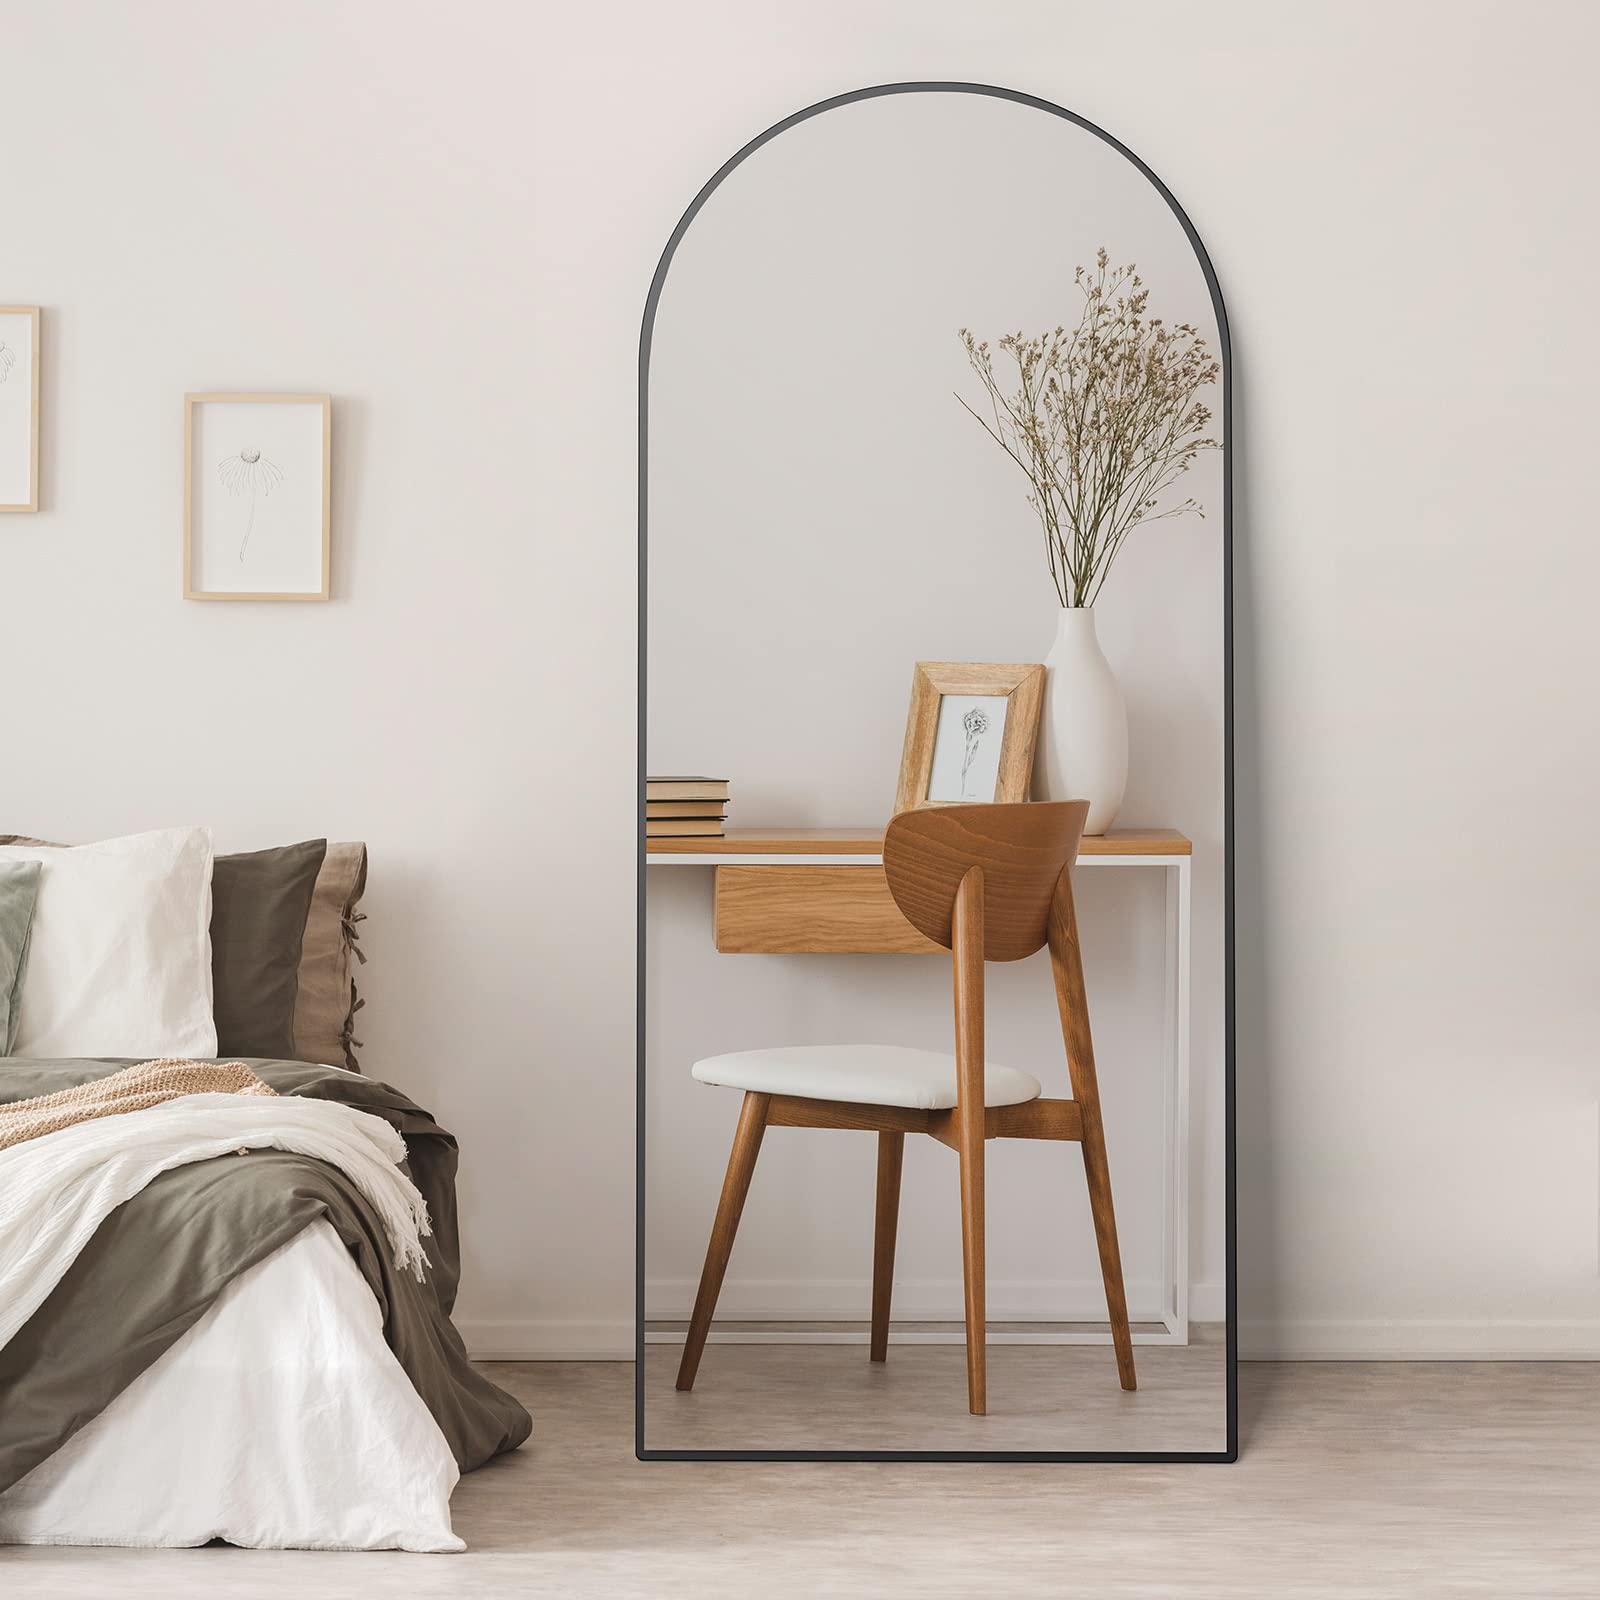 manocorro full length mirror 64"x21" arched mirror floor mirror, full body mirror, standing mirror hanging or leaning, black 